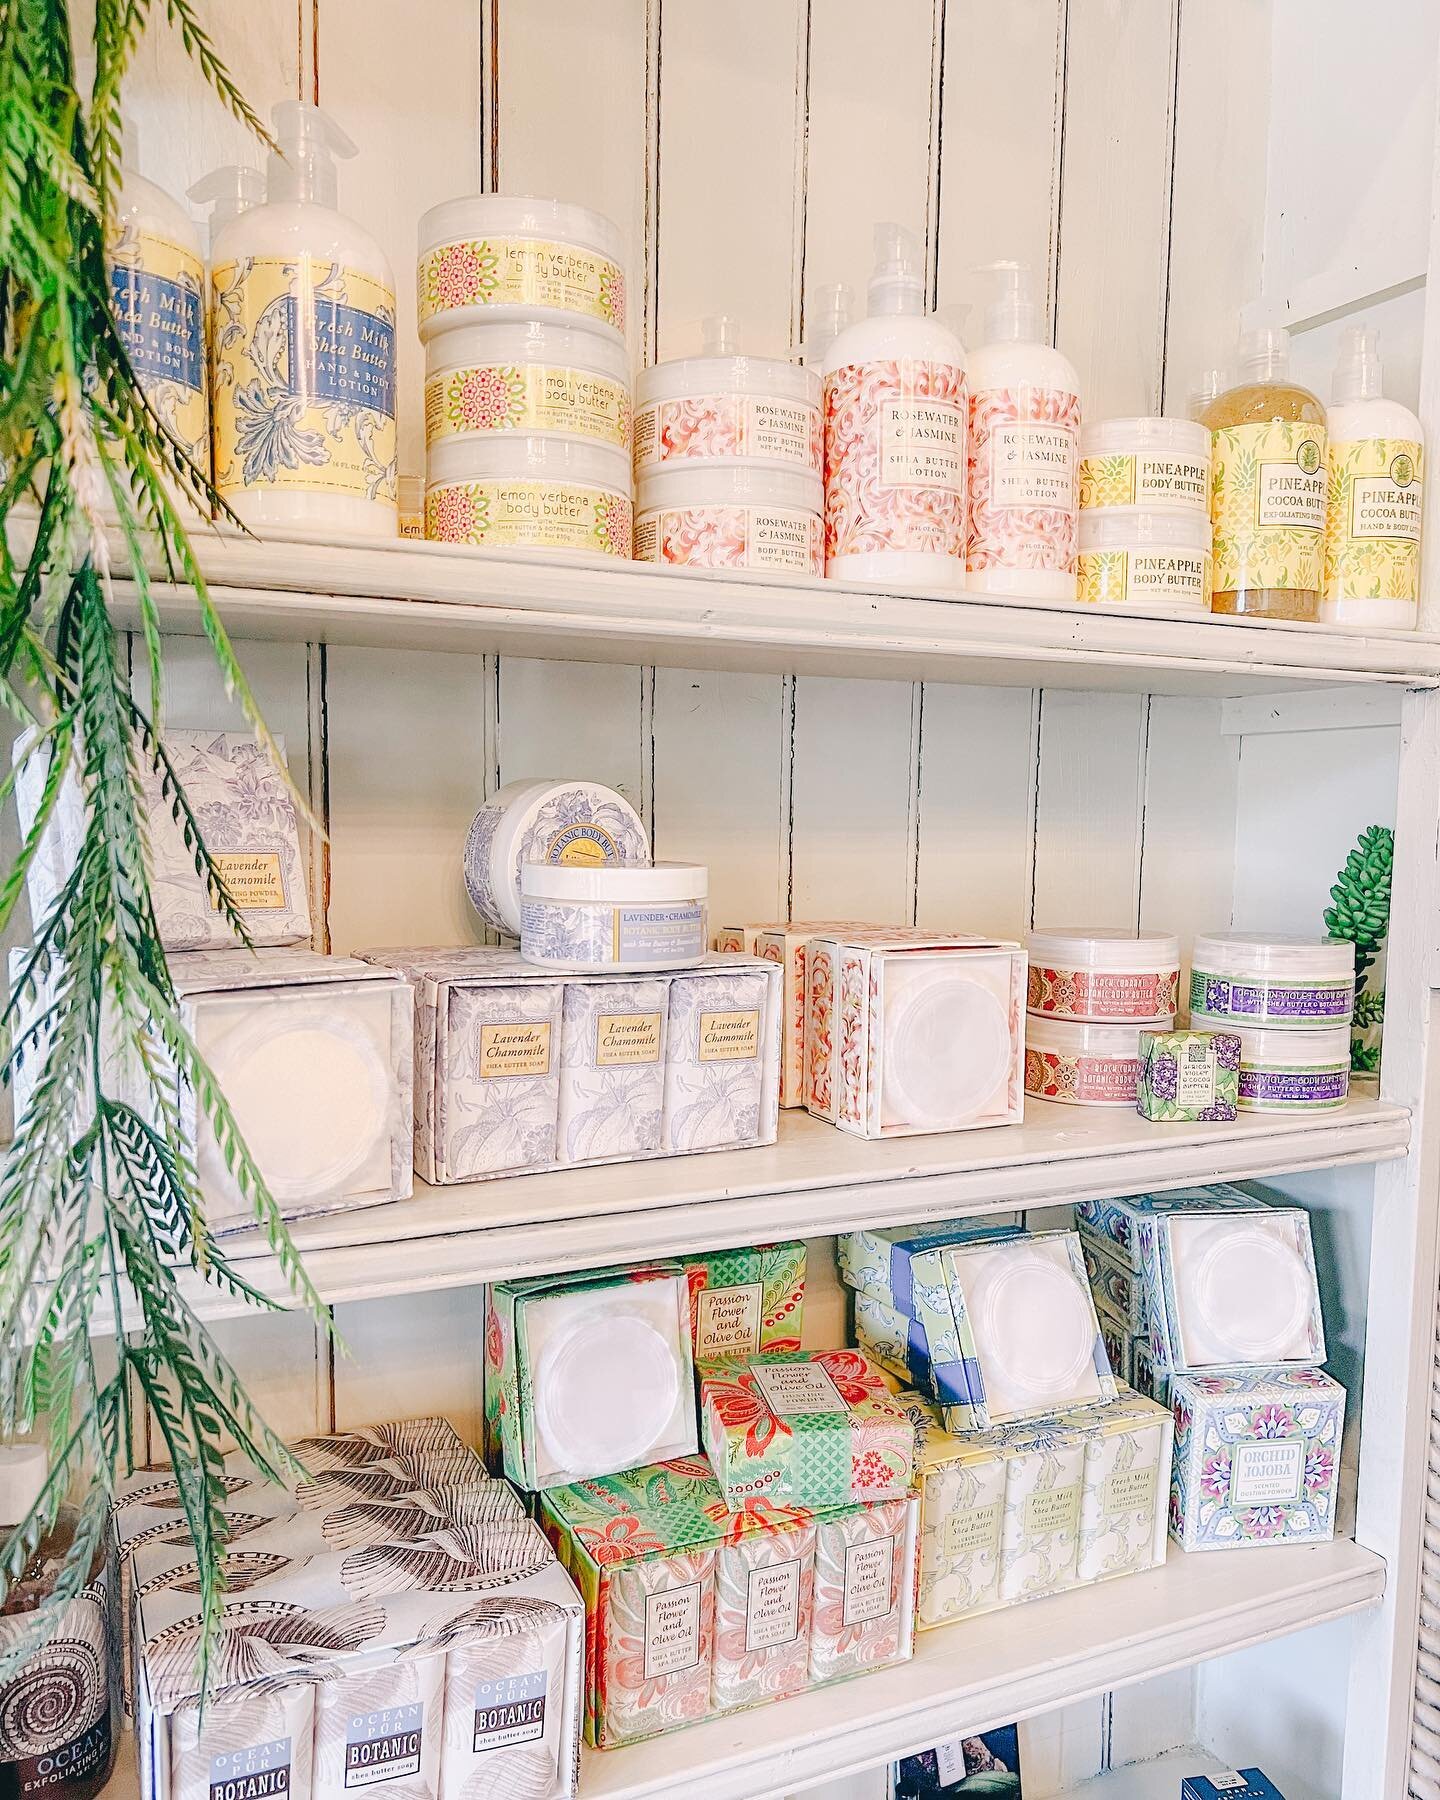 Let nature&rsquo;s botanicals renew and refresh your skin!

Greenwich Bay Trading Co. has you covered from head-to-toe. Enriched with natural butters, oils and extracts these products will give your skin new life! 
&bull;
@pearlsspa
&bull;
#pearlsspa